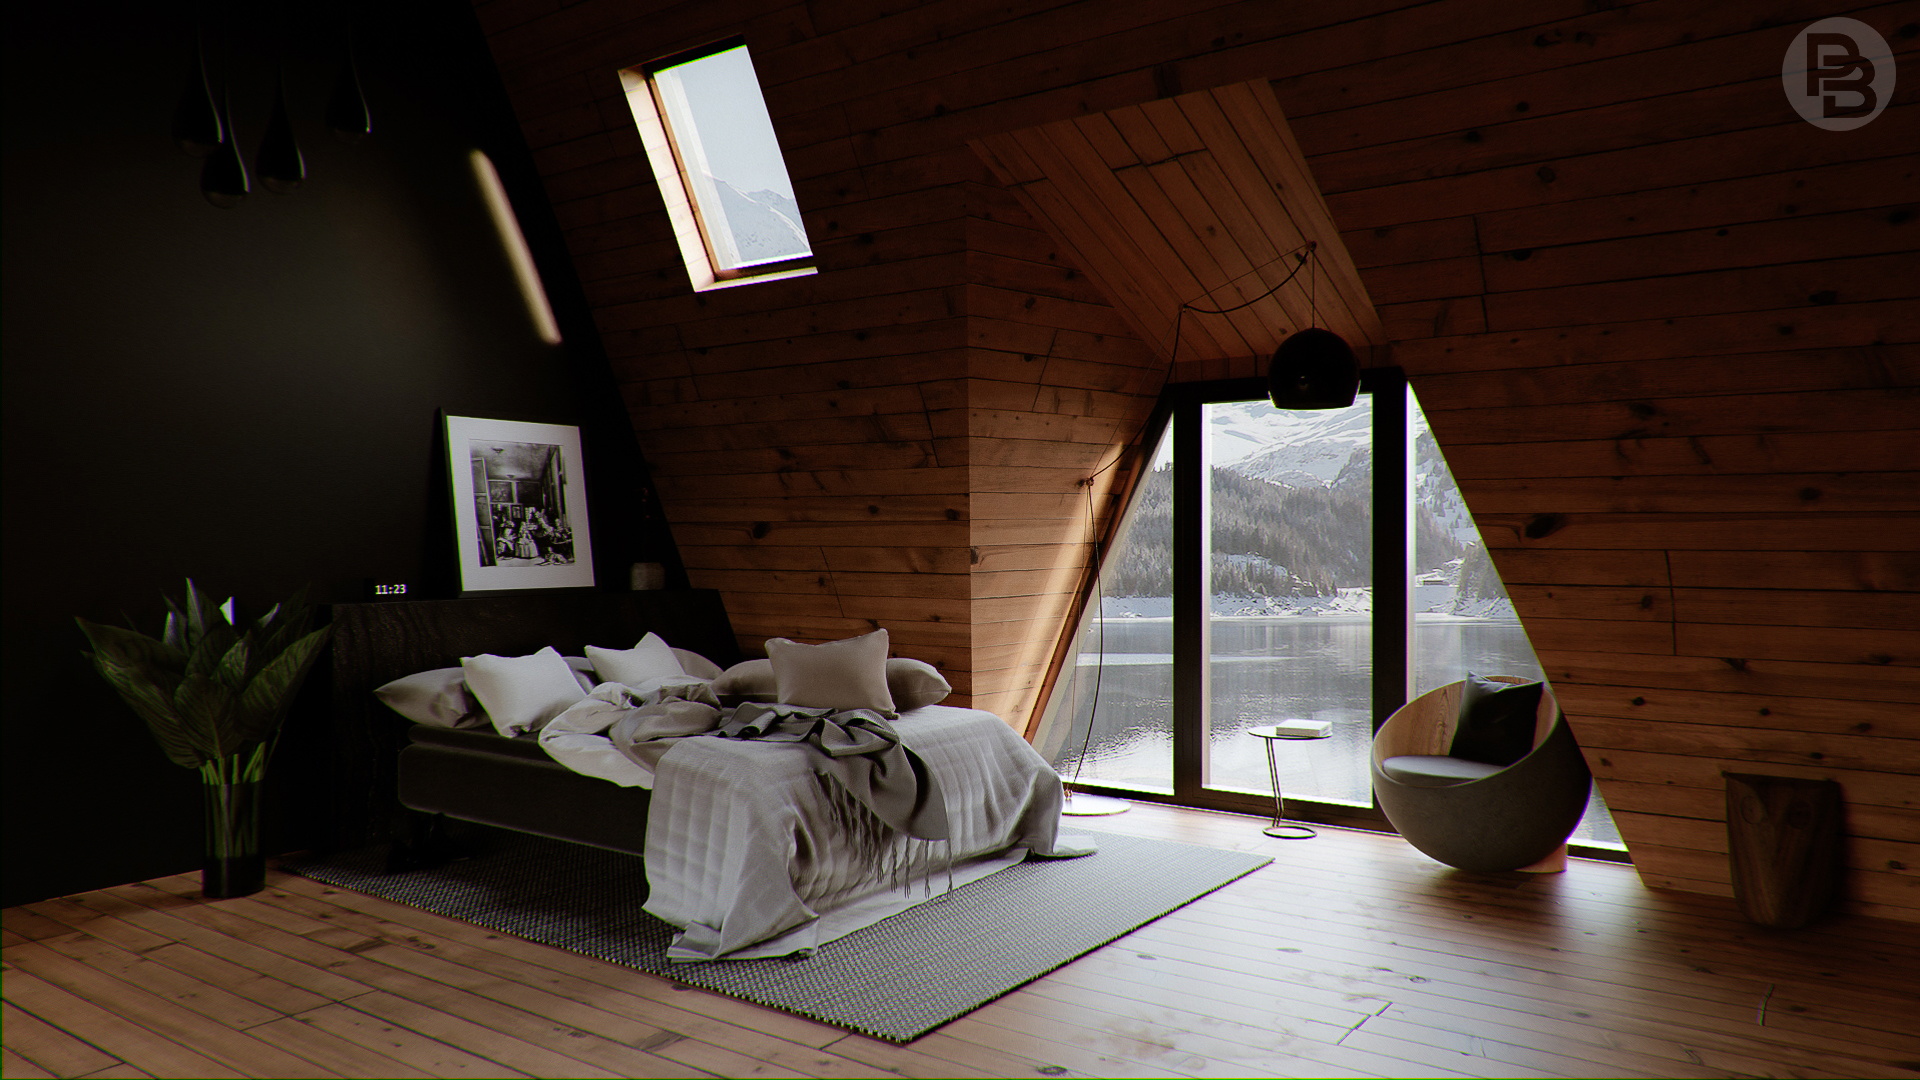 Realistic bedroom a landscape - Finished Projects Artists Community